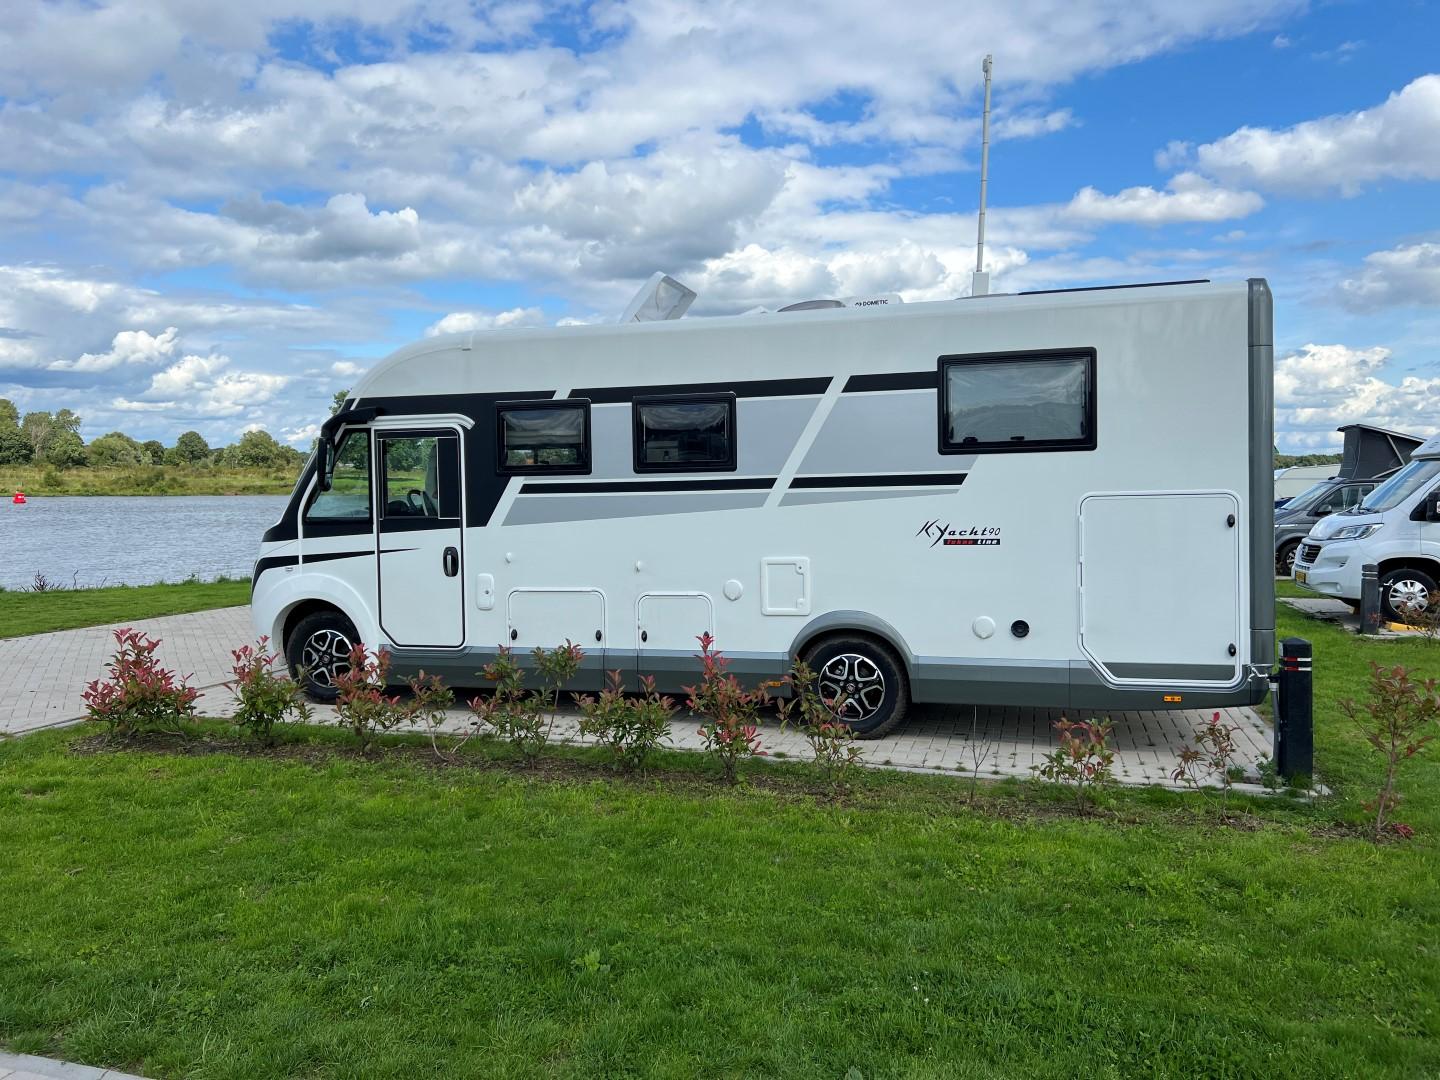 Where to go with a motorhome for the first time? – image 1